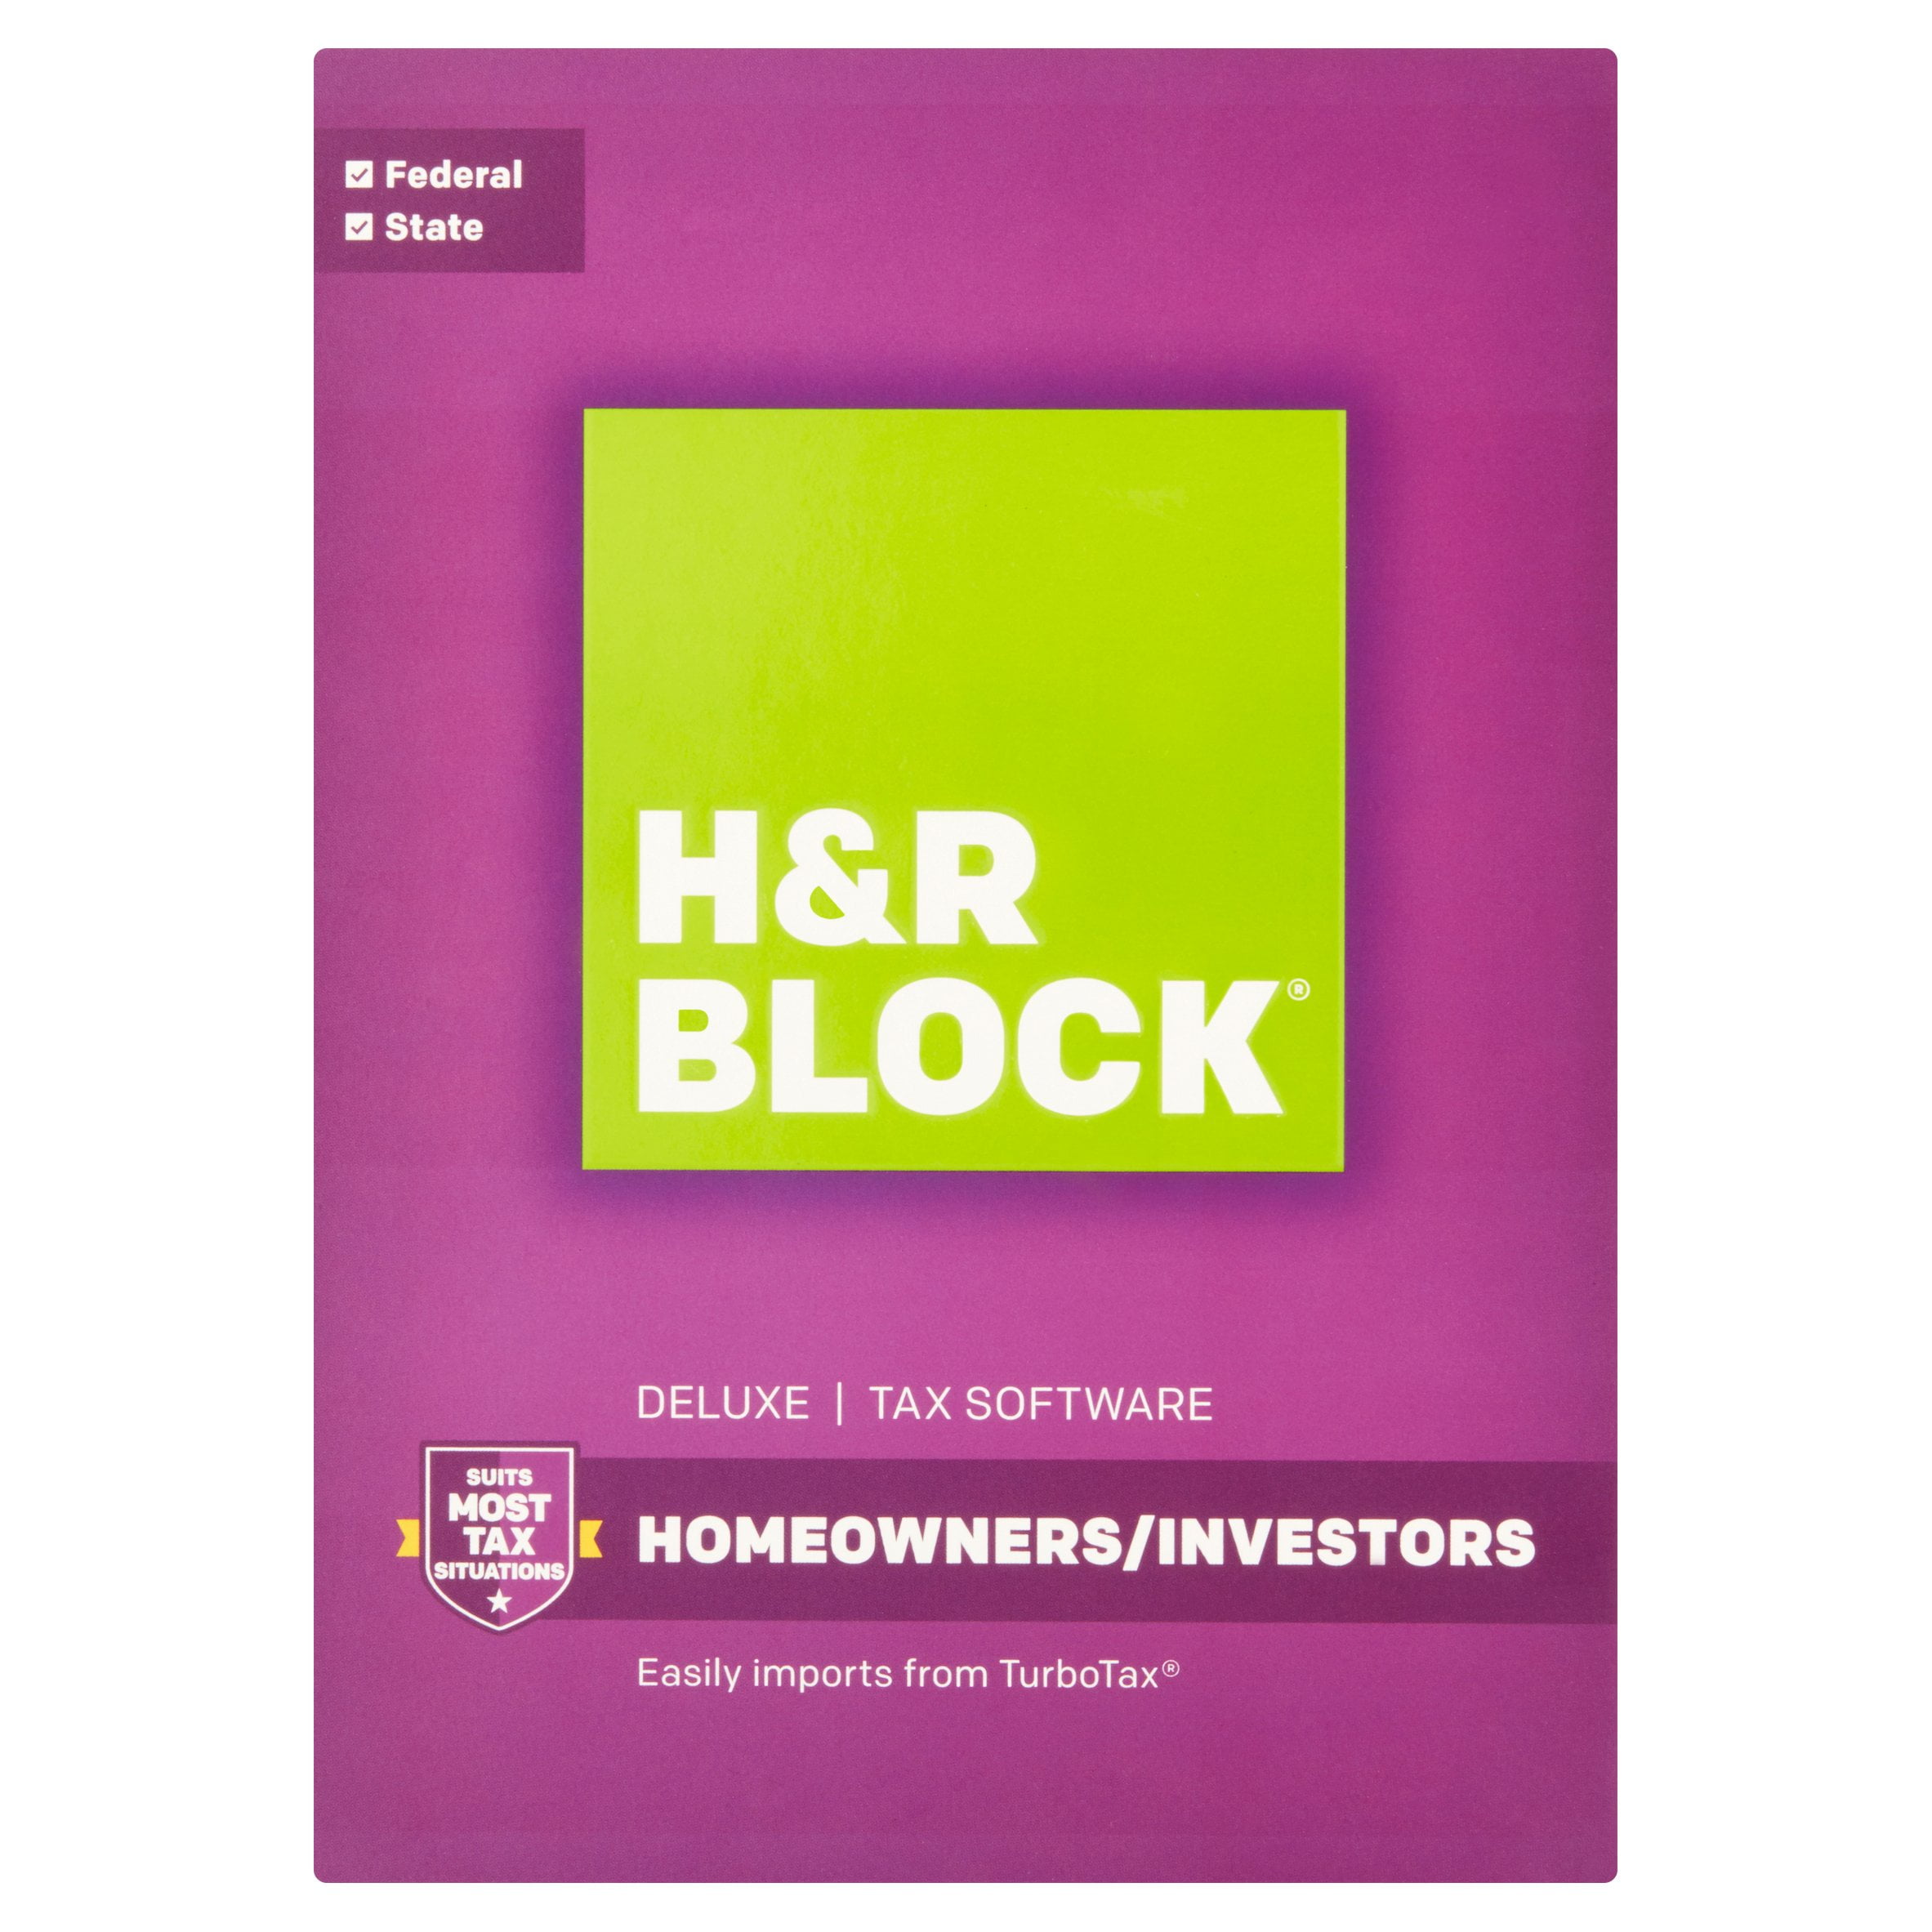 H&R Block Deluxe Tax Software